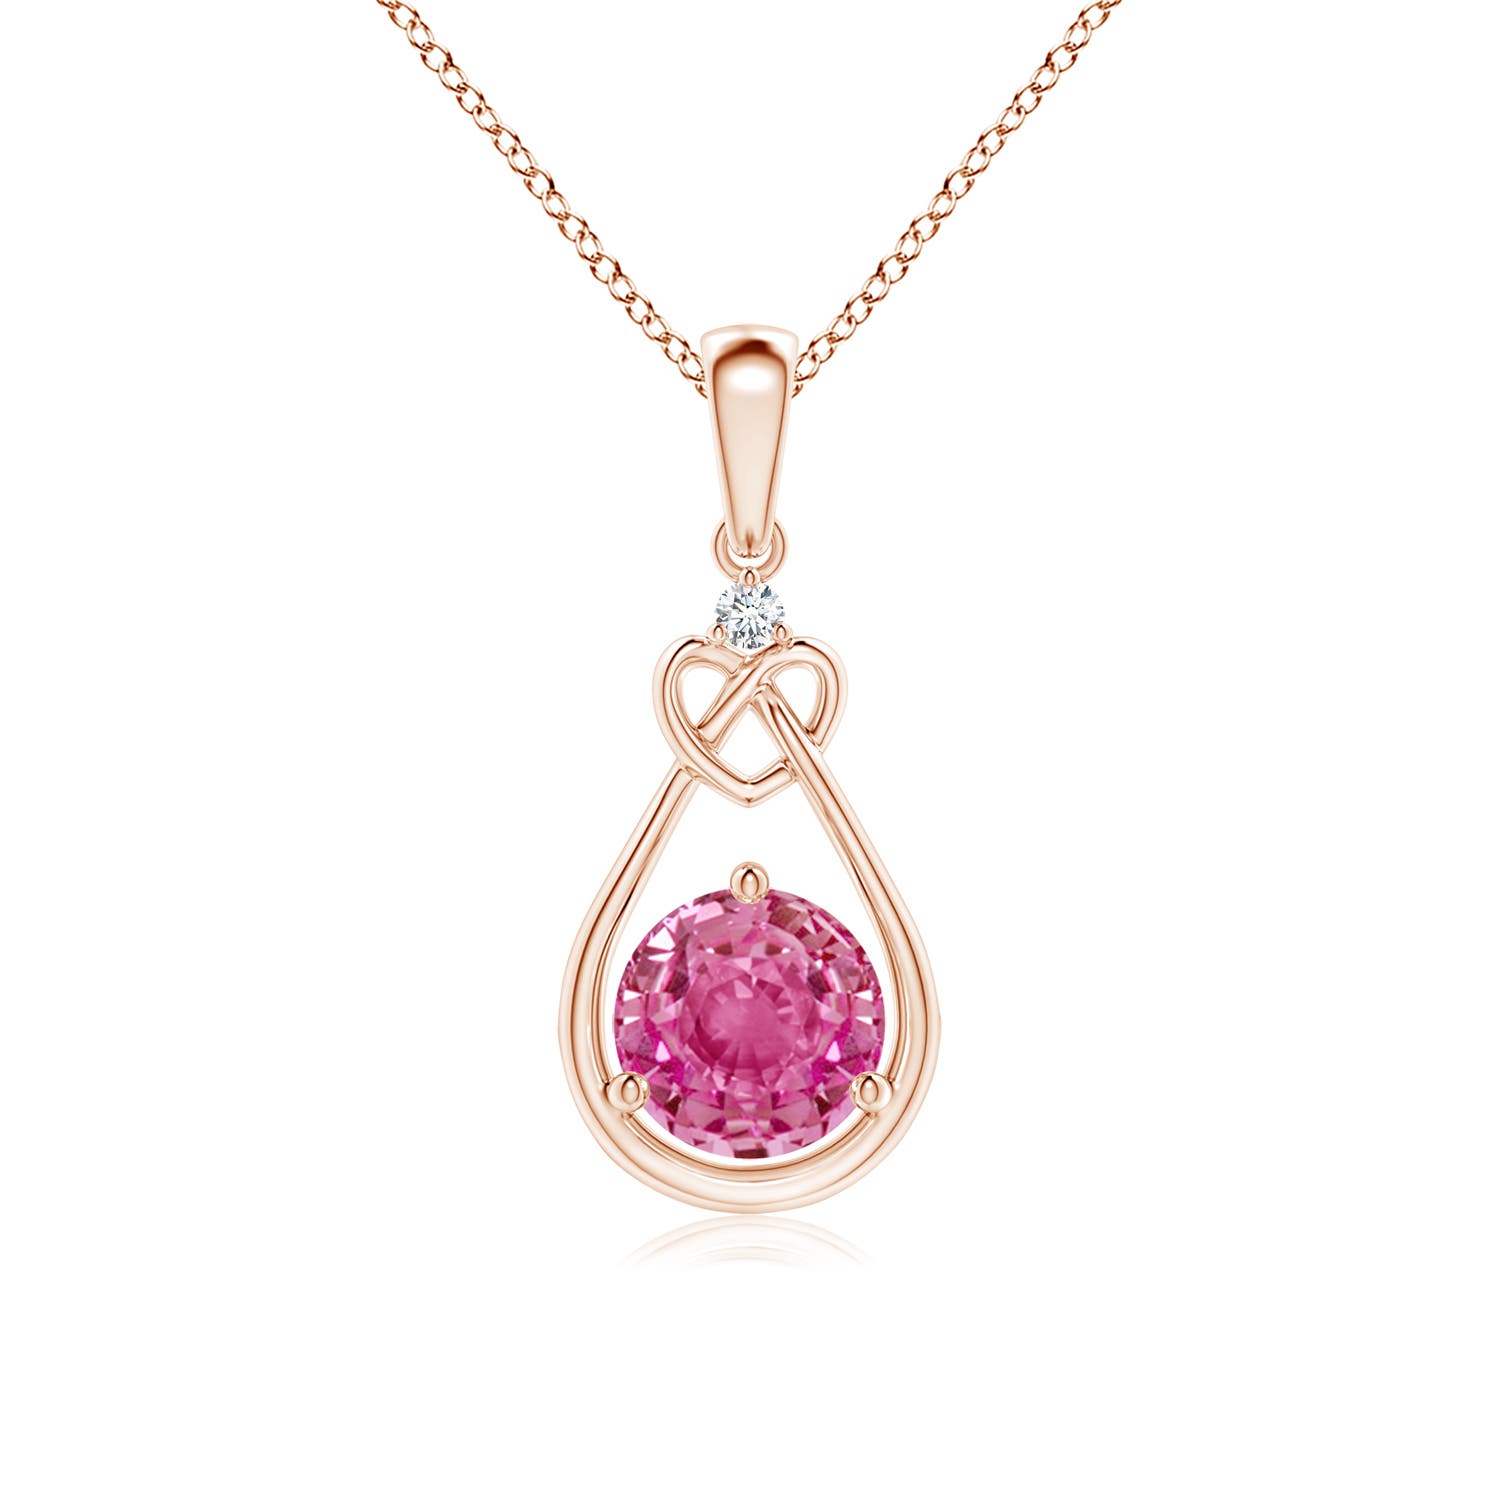 AAA - Pink Sapphire / 1.01 CT / 14 KT Rose Gold